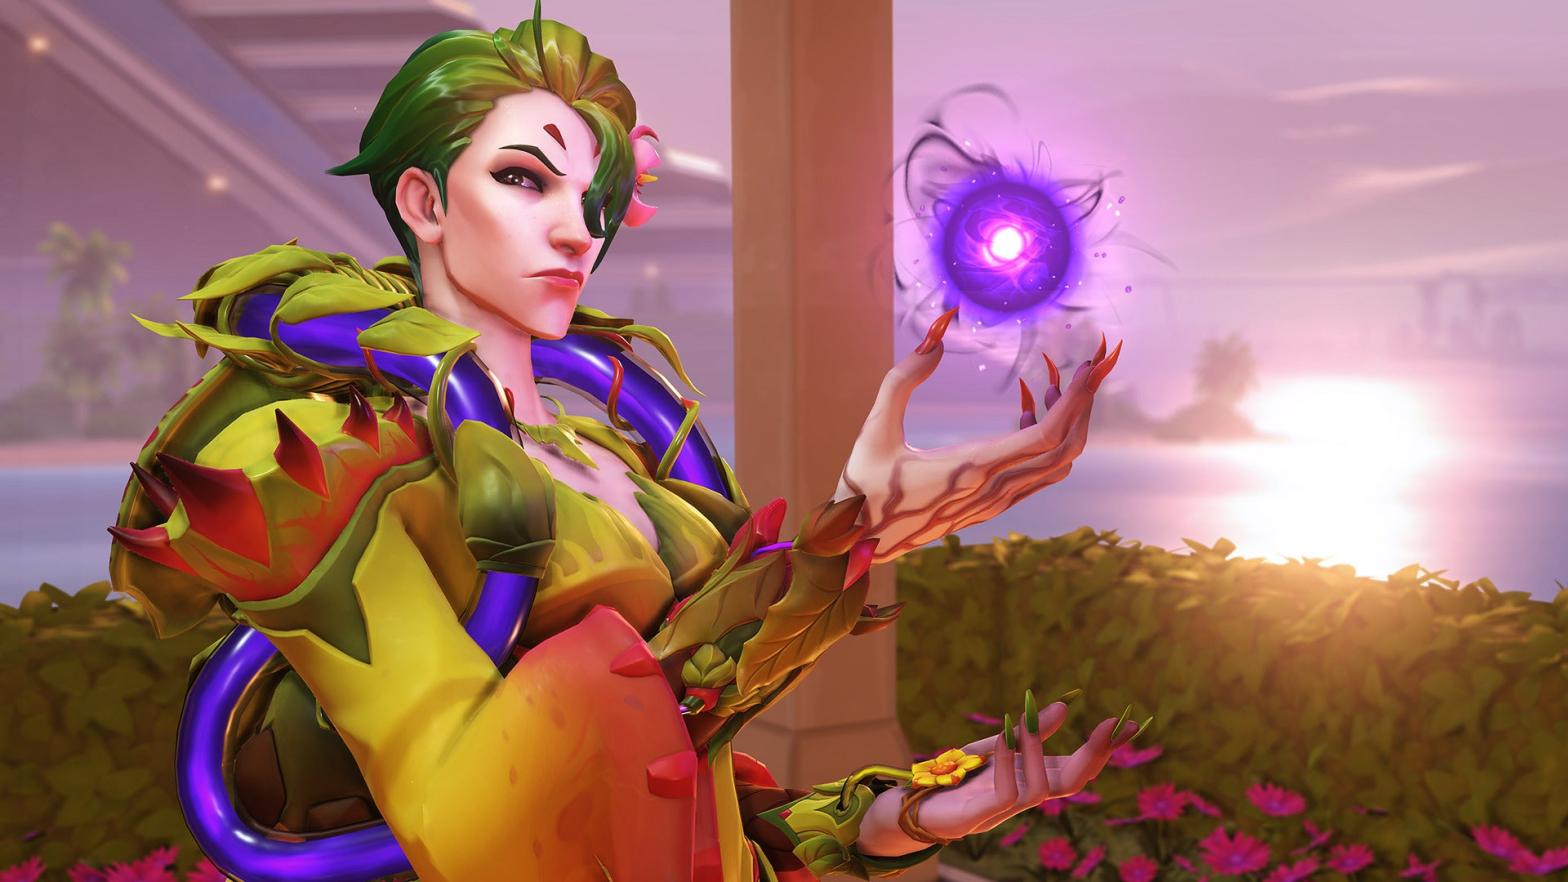 It's me, the Moira in Overwatch 2 pumping you full of healing juice. (Image: Blizzard)